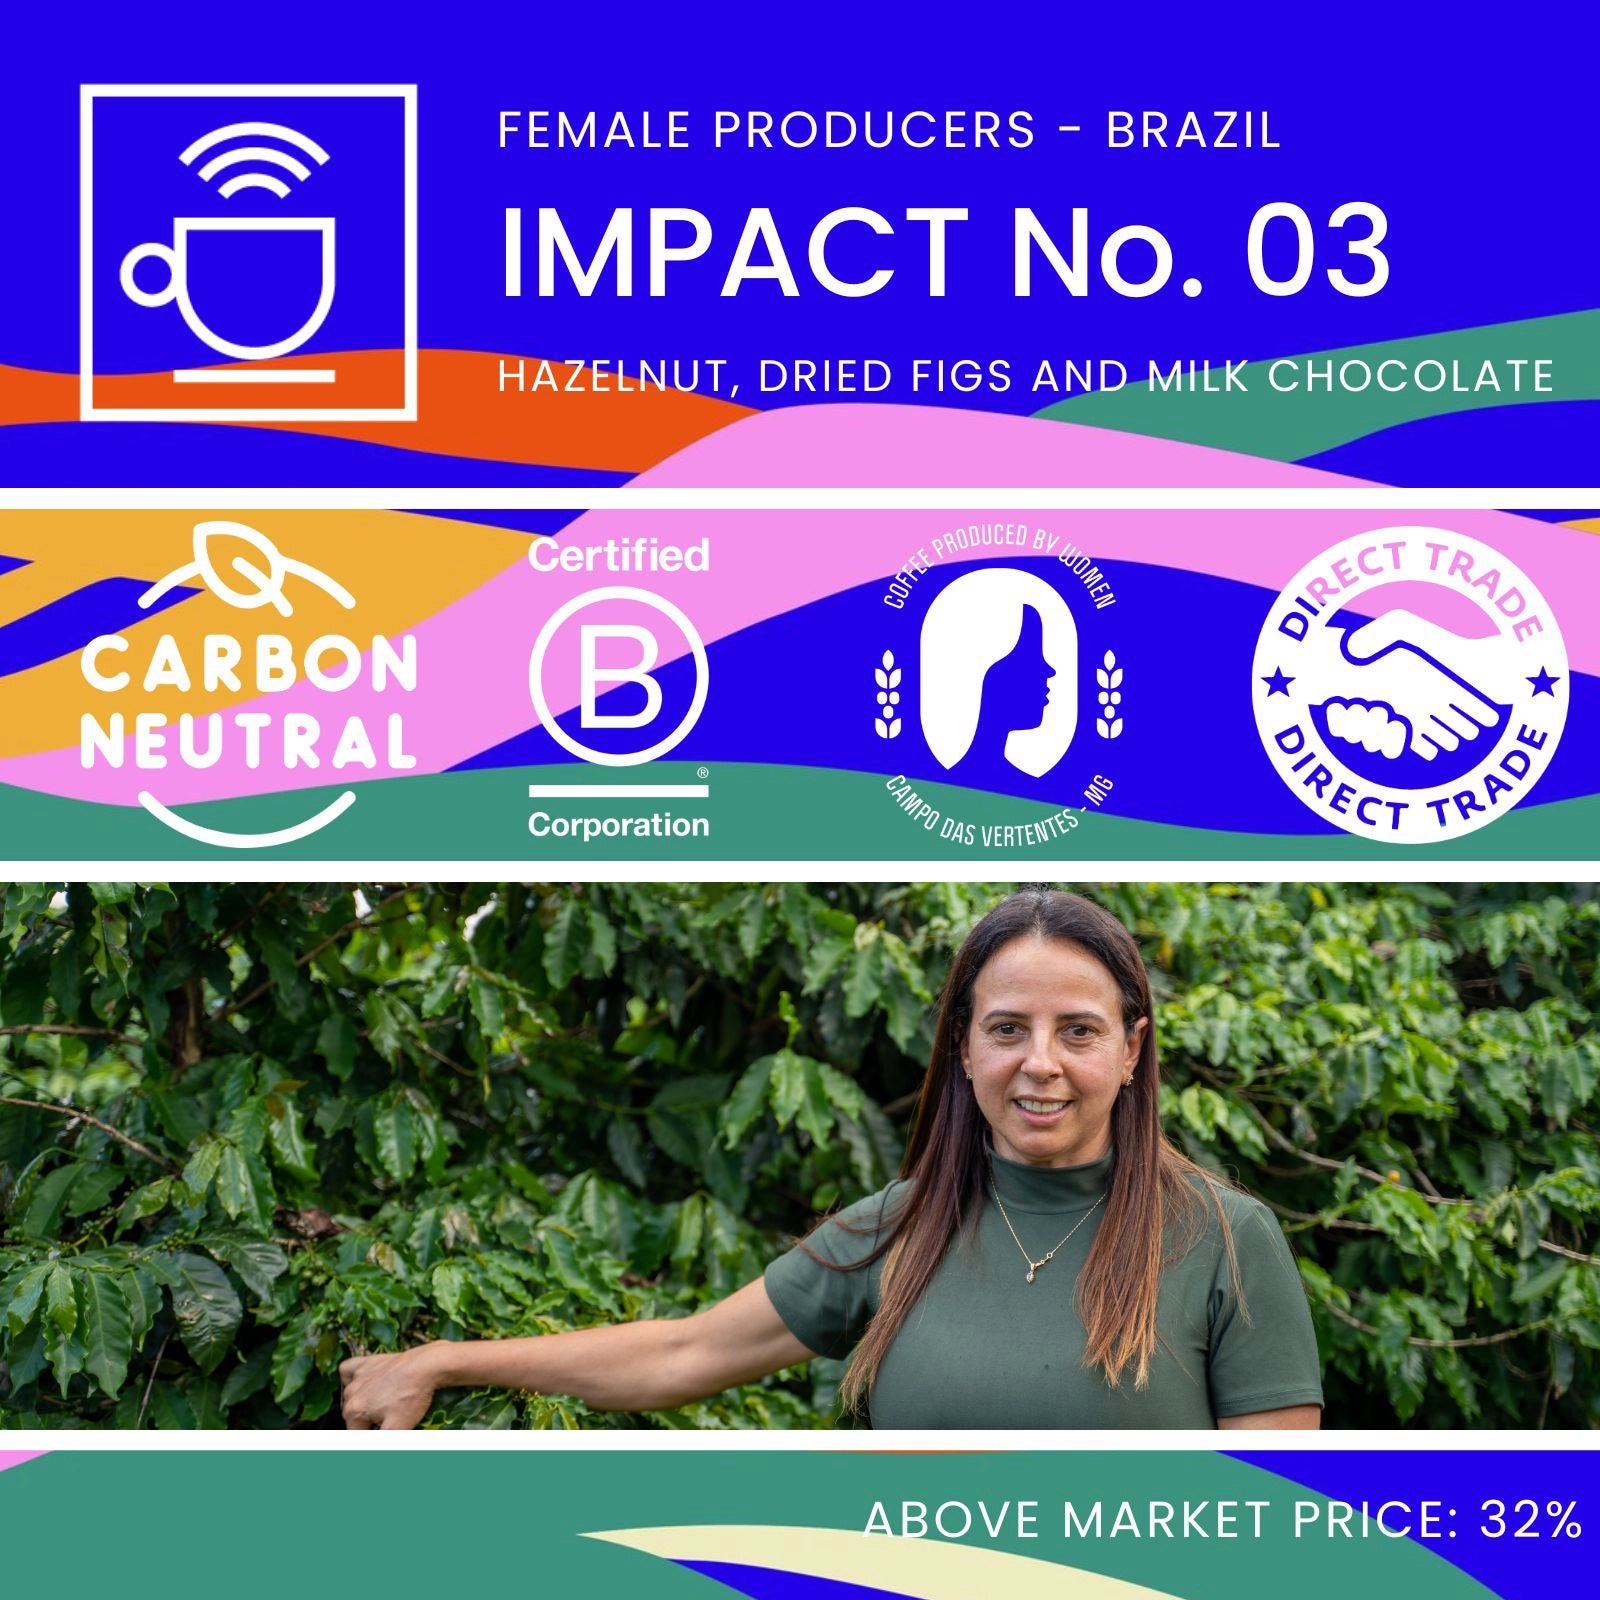 IMPACT No. 03 - carbon neutral coffee produced by women